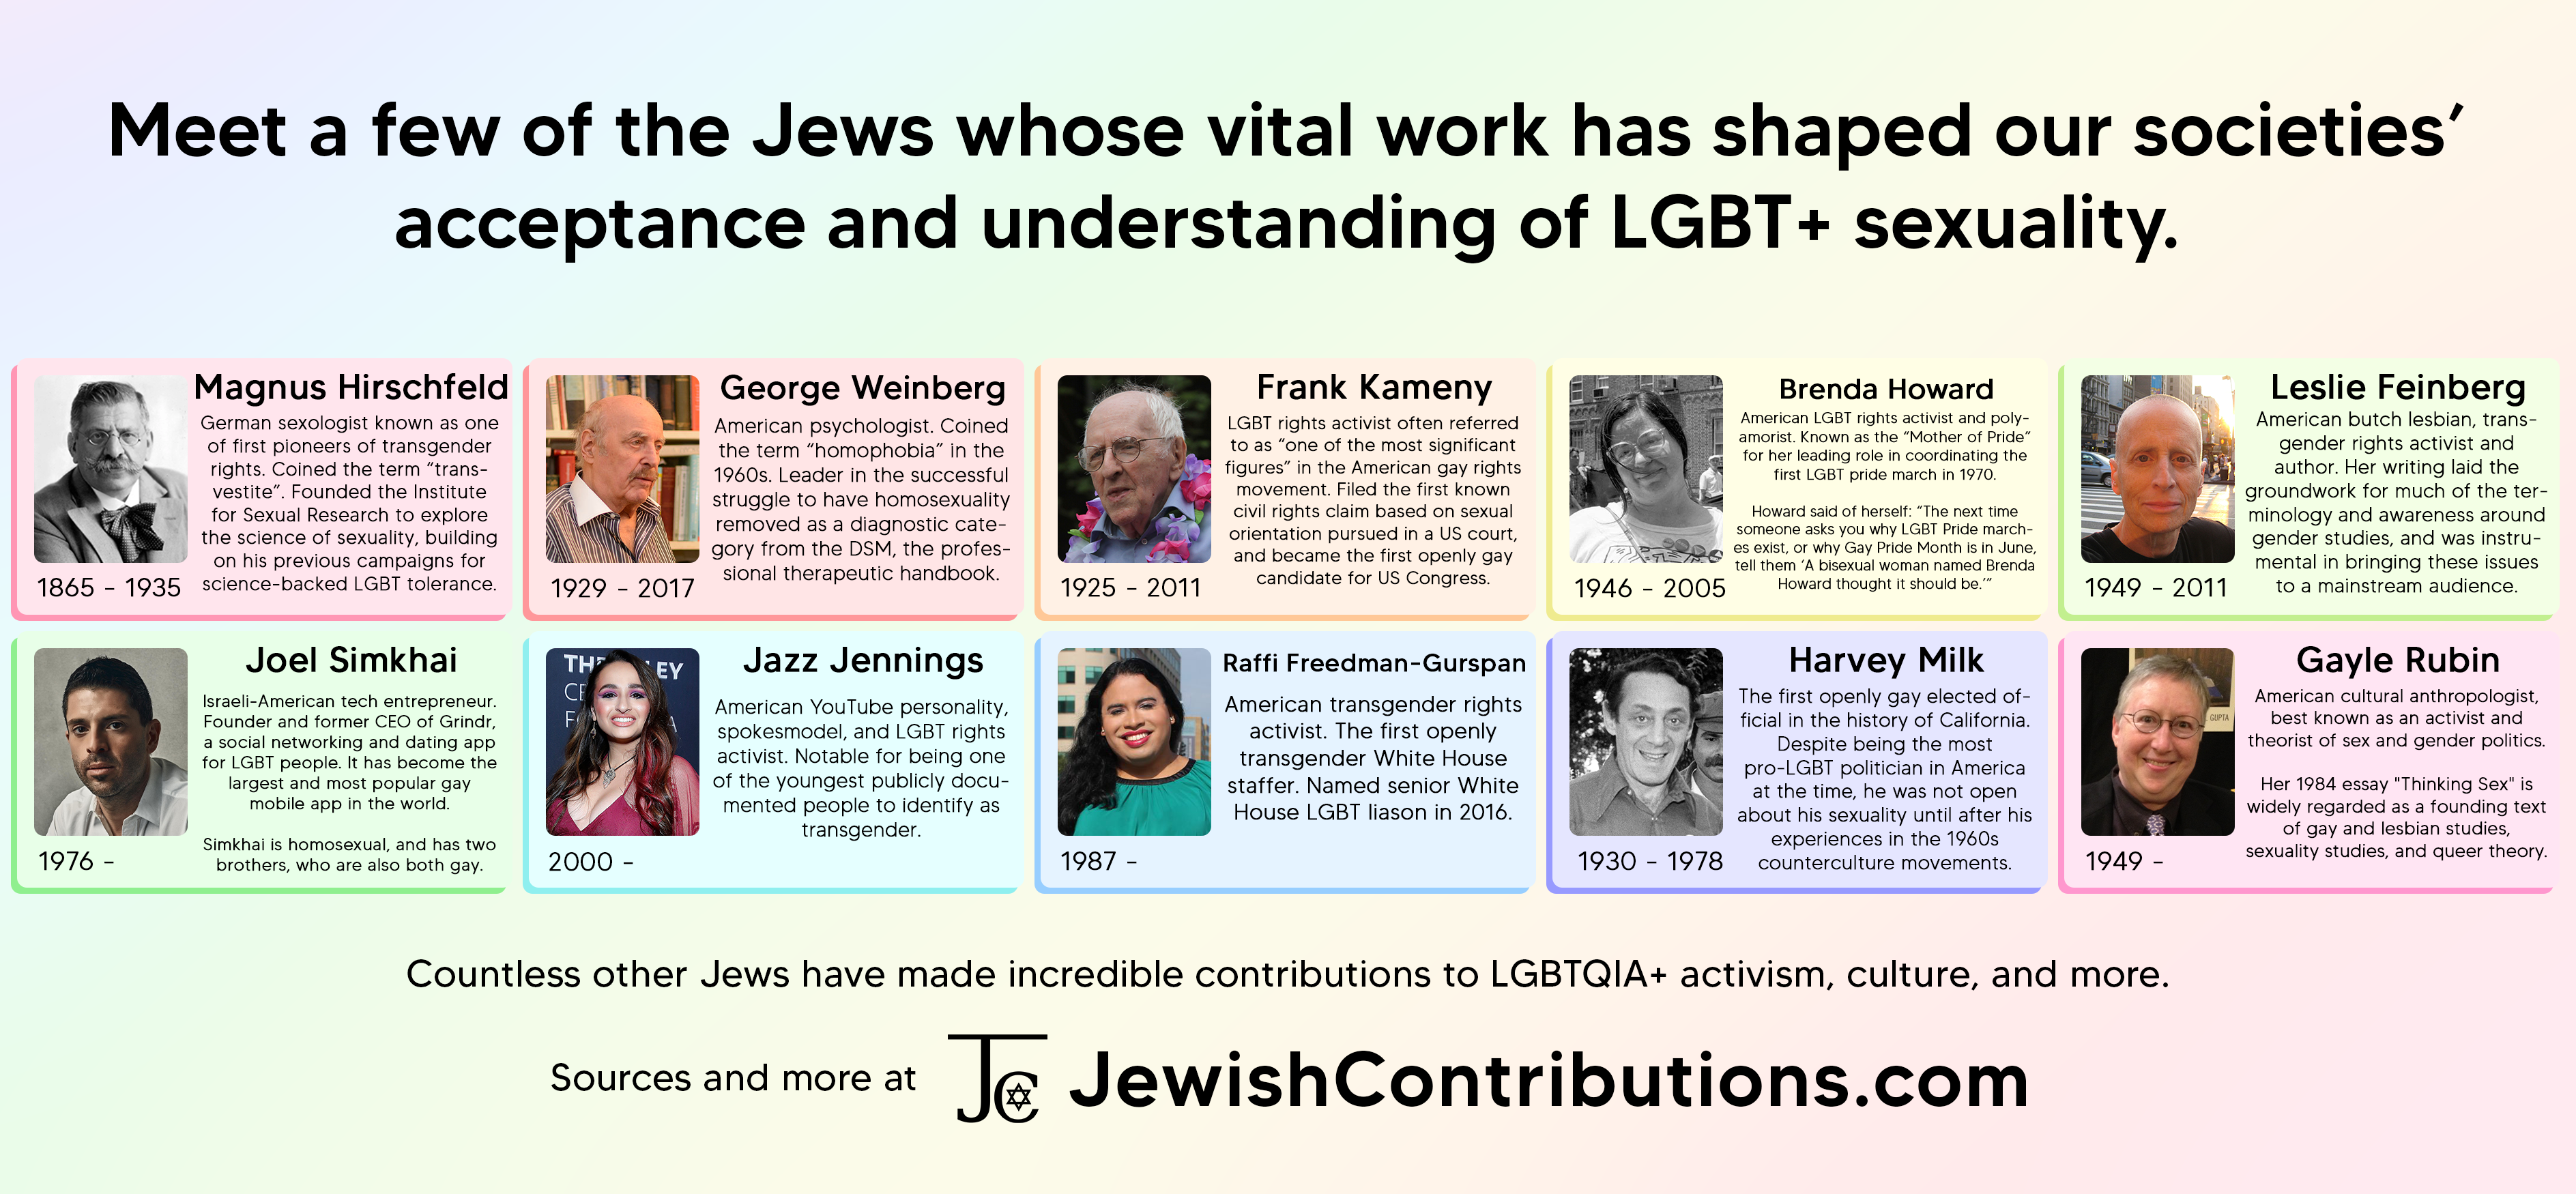 Meet a few of the Jews whose vital work has shaped our societies’ acceptance and understanding of LGBT+ sexuality.